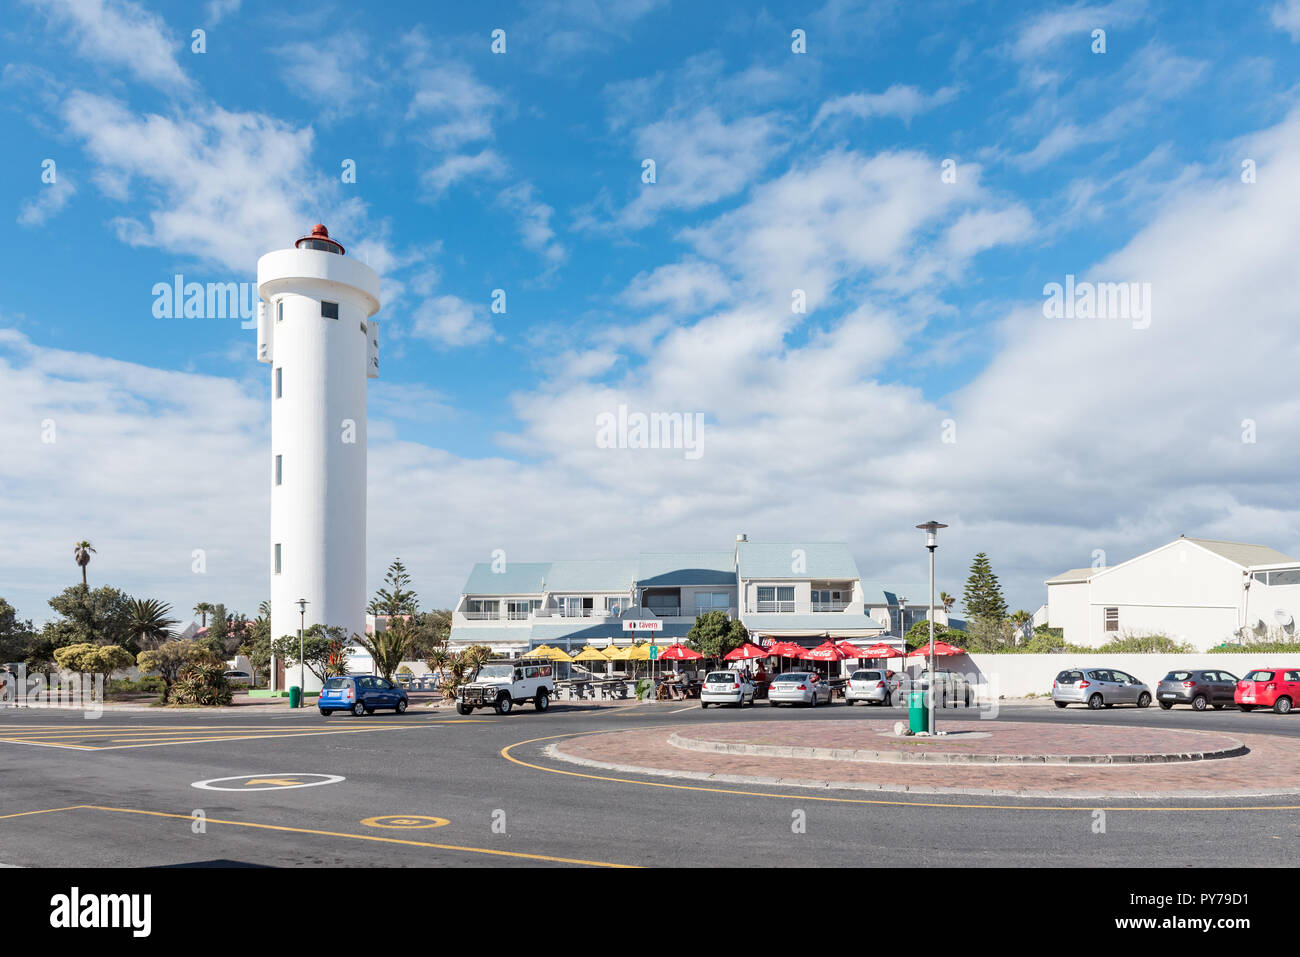 CAPE TOWN, SOUTH AFRICA, AUGUST 14, 2018: A street scene in Milnerton. The lighthouse, a restaurant, people and vehicles are visible Stock Photo